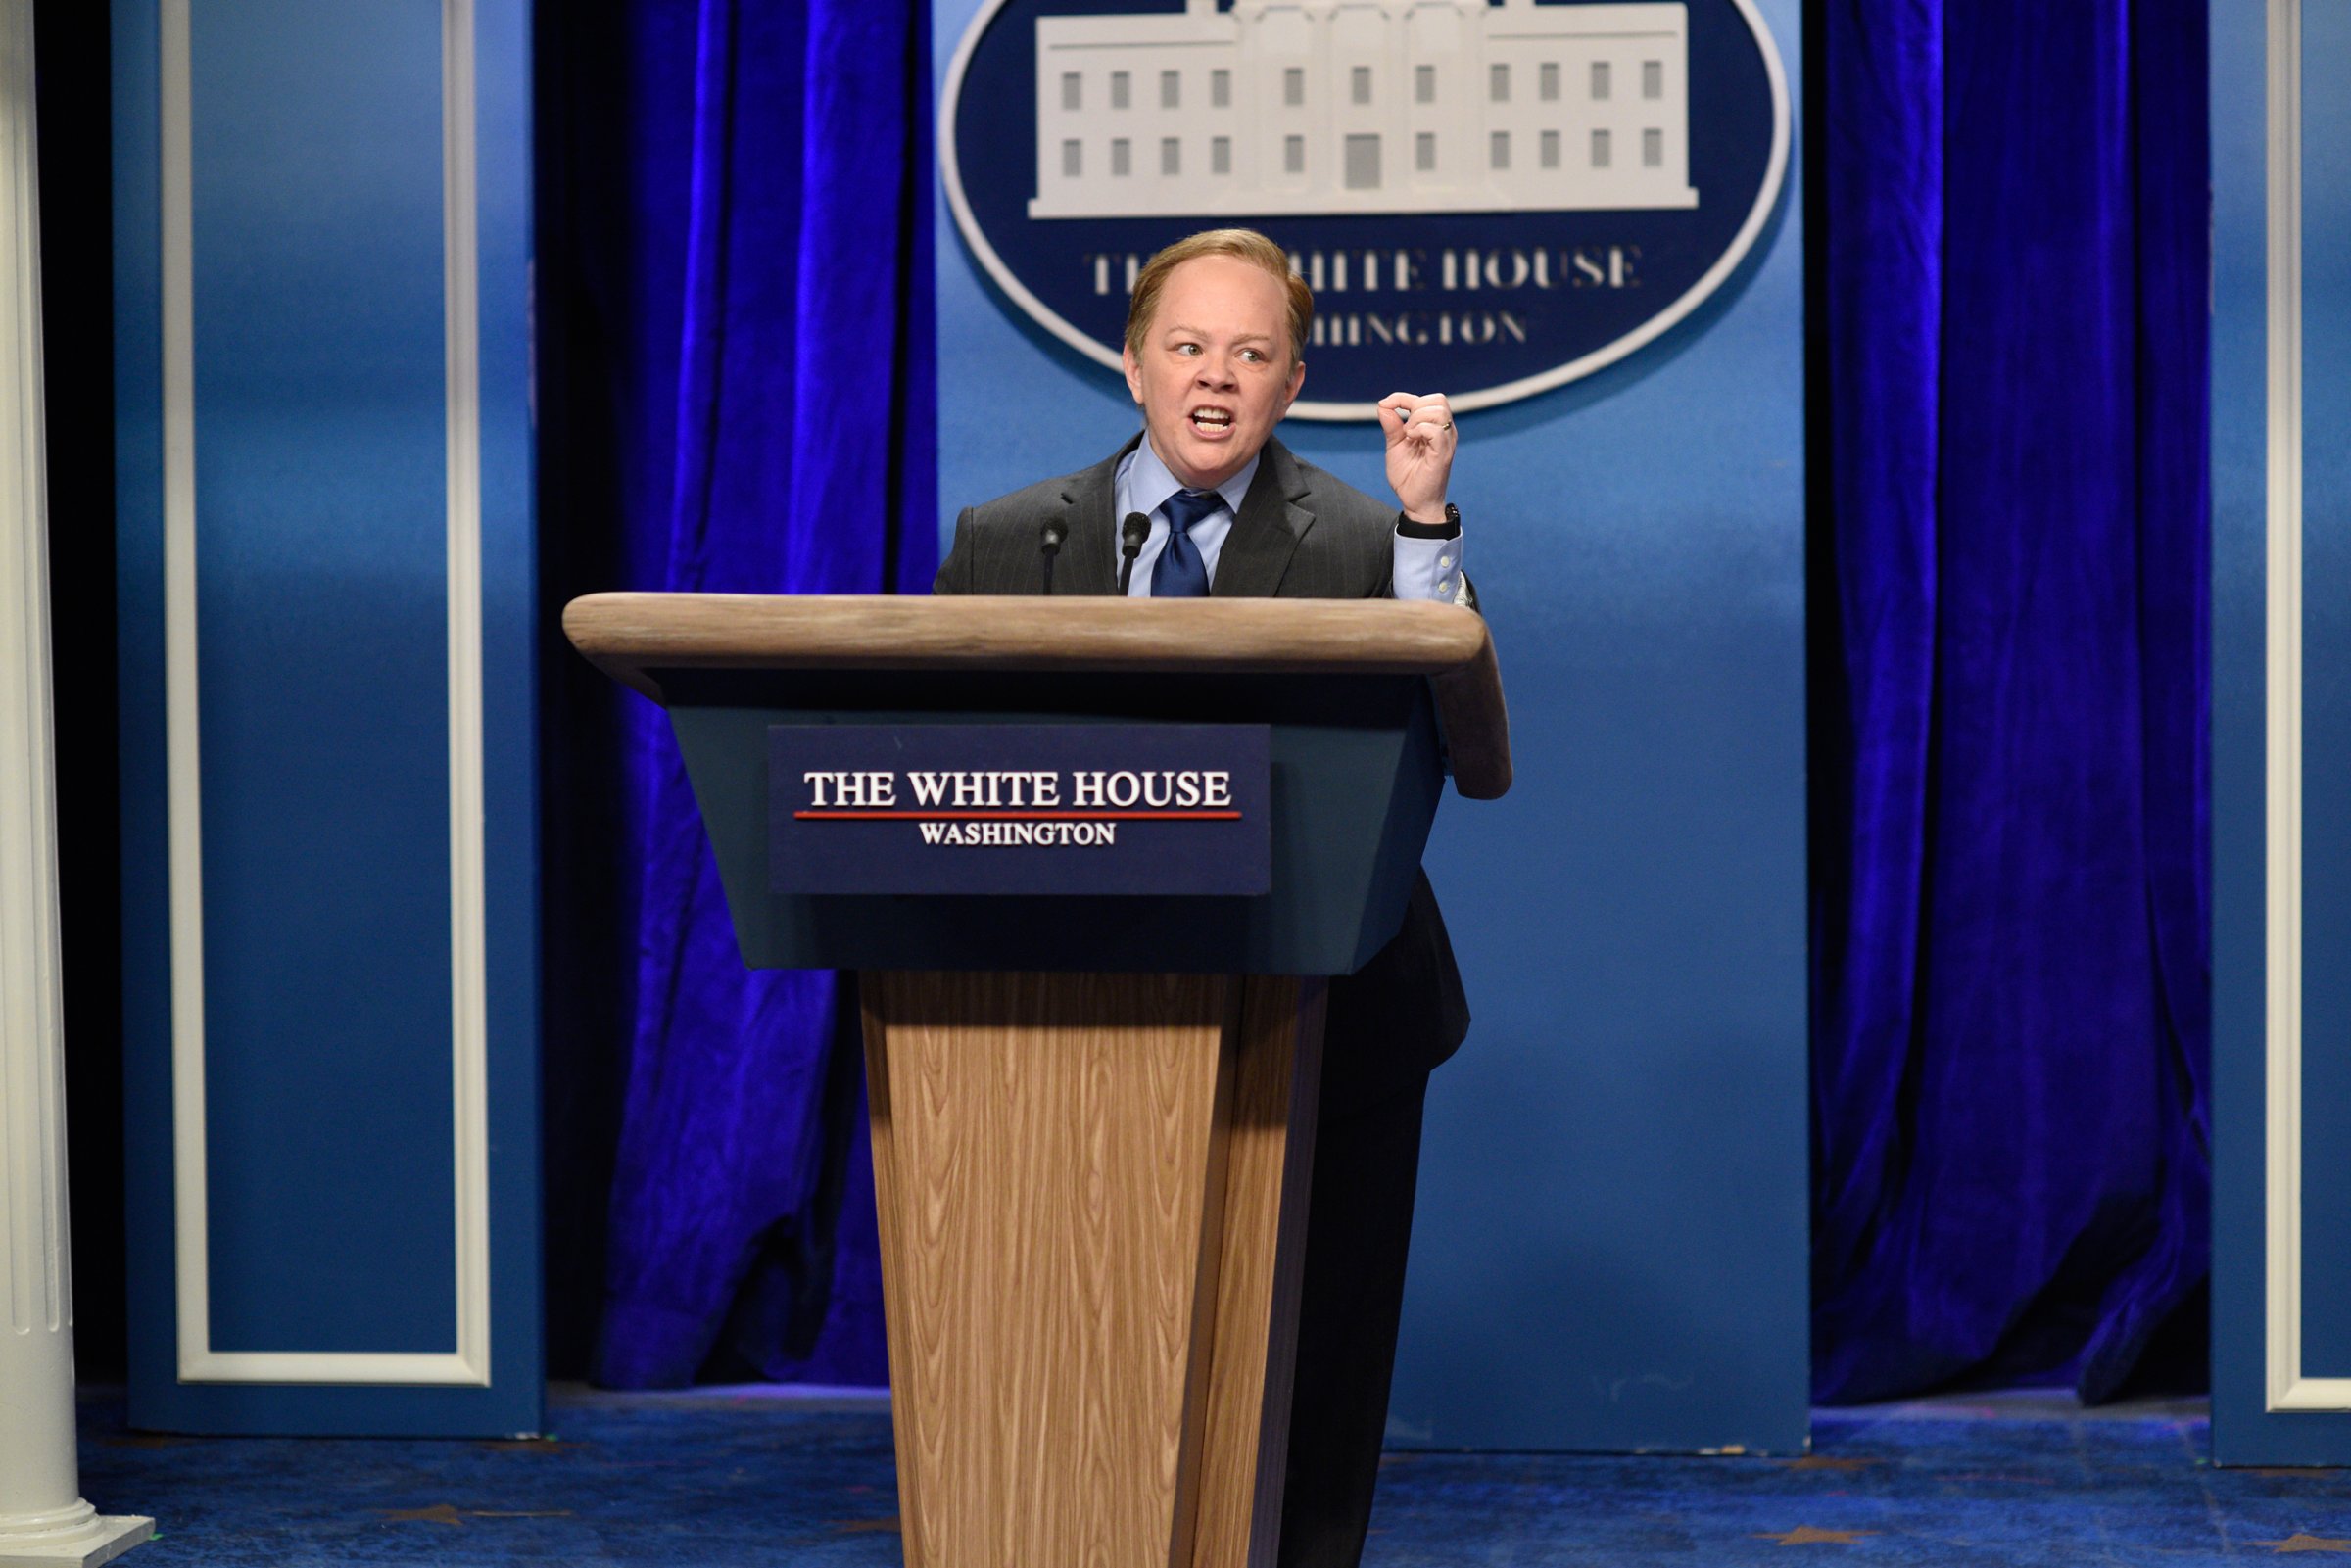 SATURDAY NIGHT LIVE -- "Kristen Stewart" Episode 1717 -- Pictured: Melissa McCarthy as Press Secretary Sean Spicer during the "Sean Spicer Press Conference" sketch on February 4th, 2017 -- (Photo by: Will Heath/NBC/NBCU Photo Bank via Getty Images)